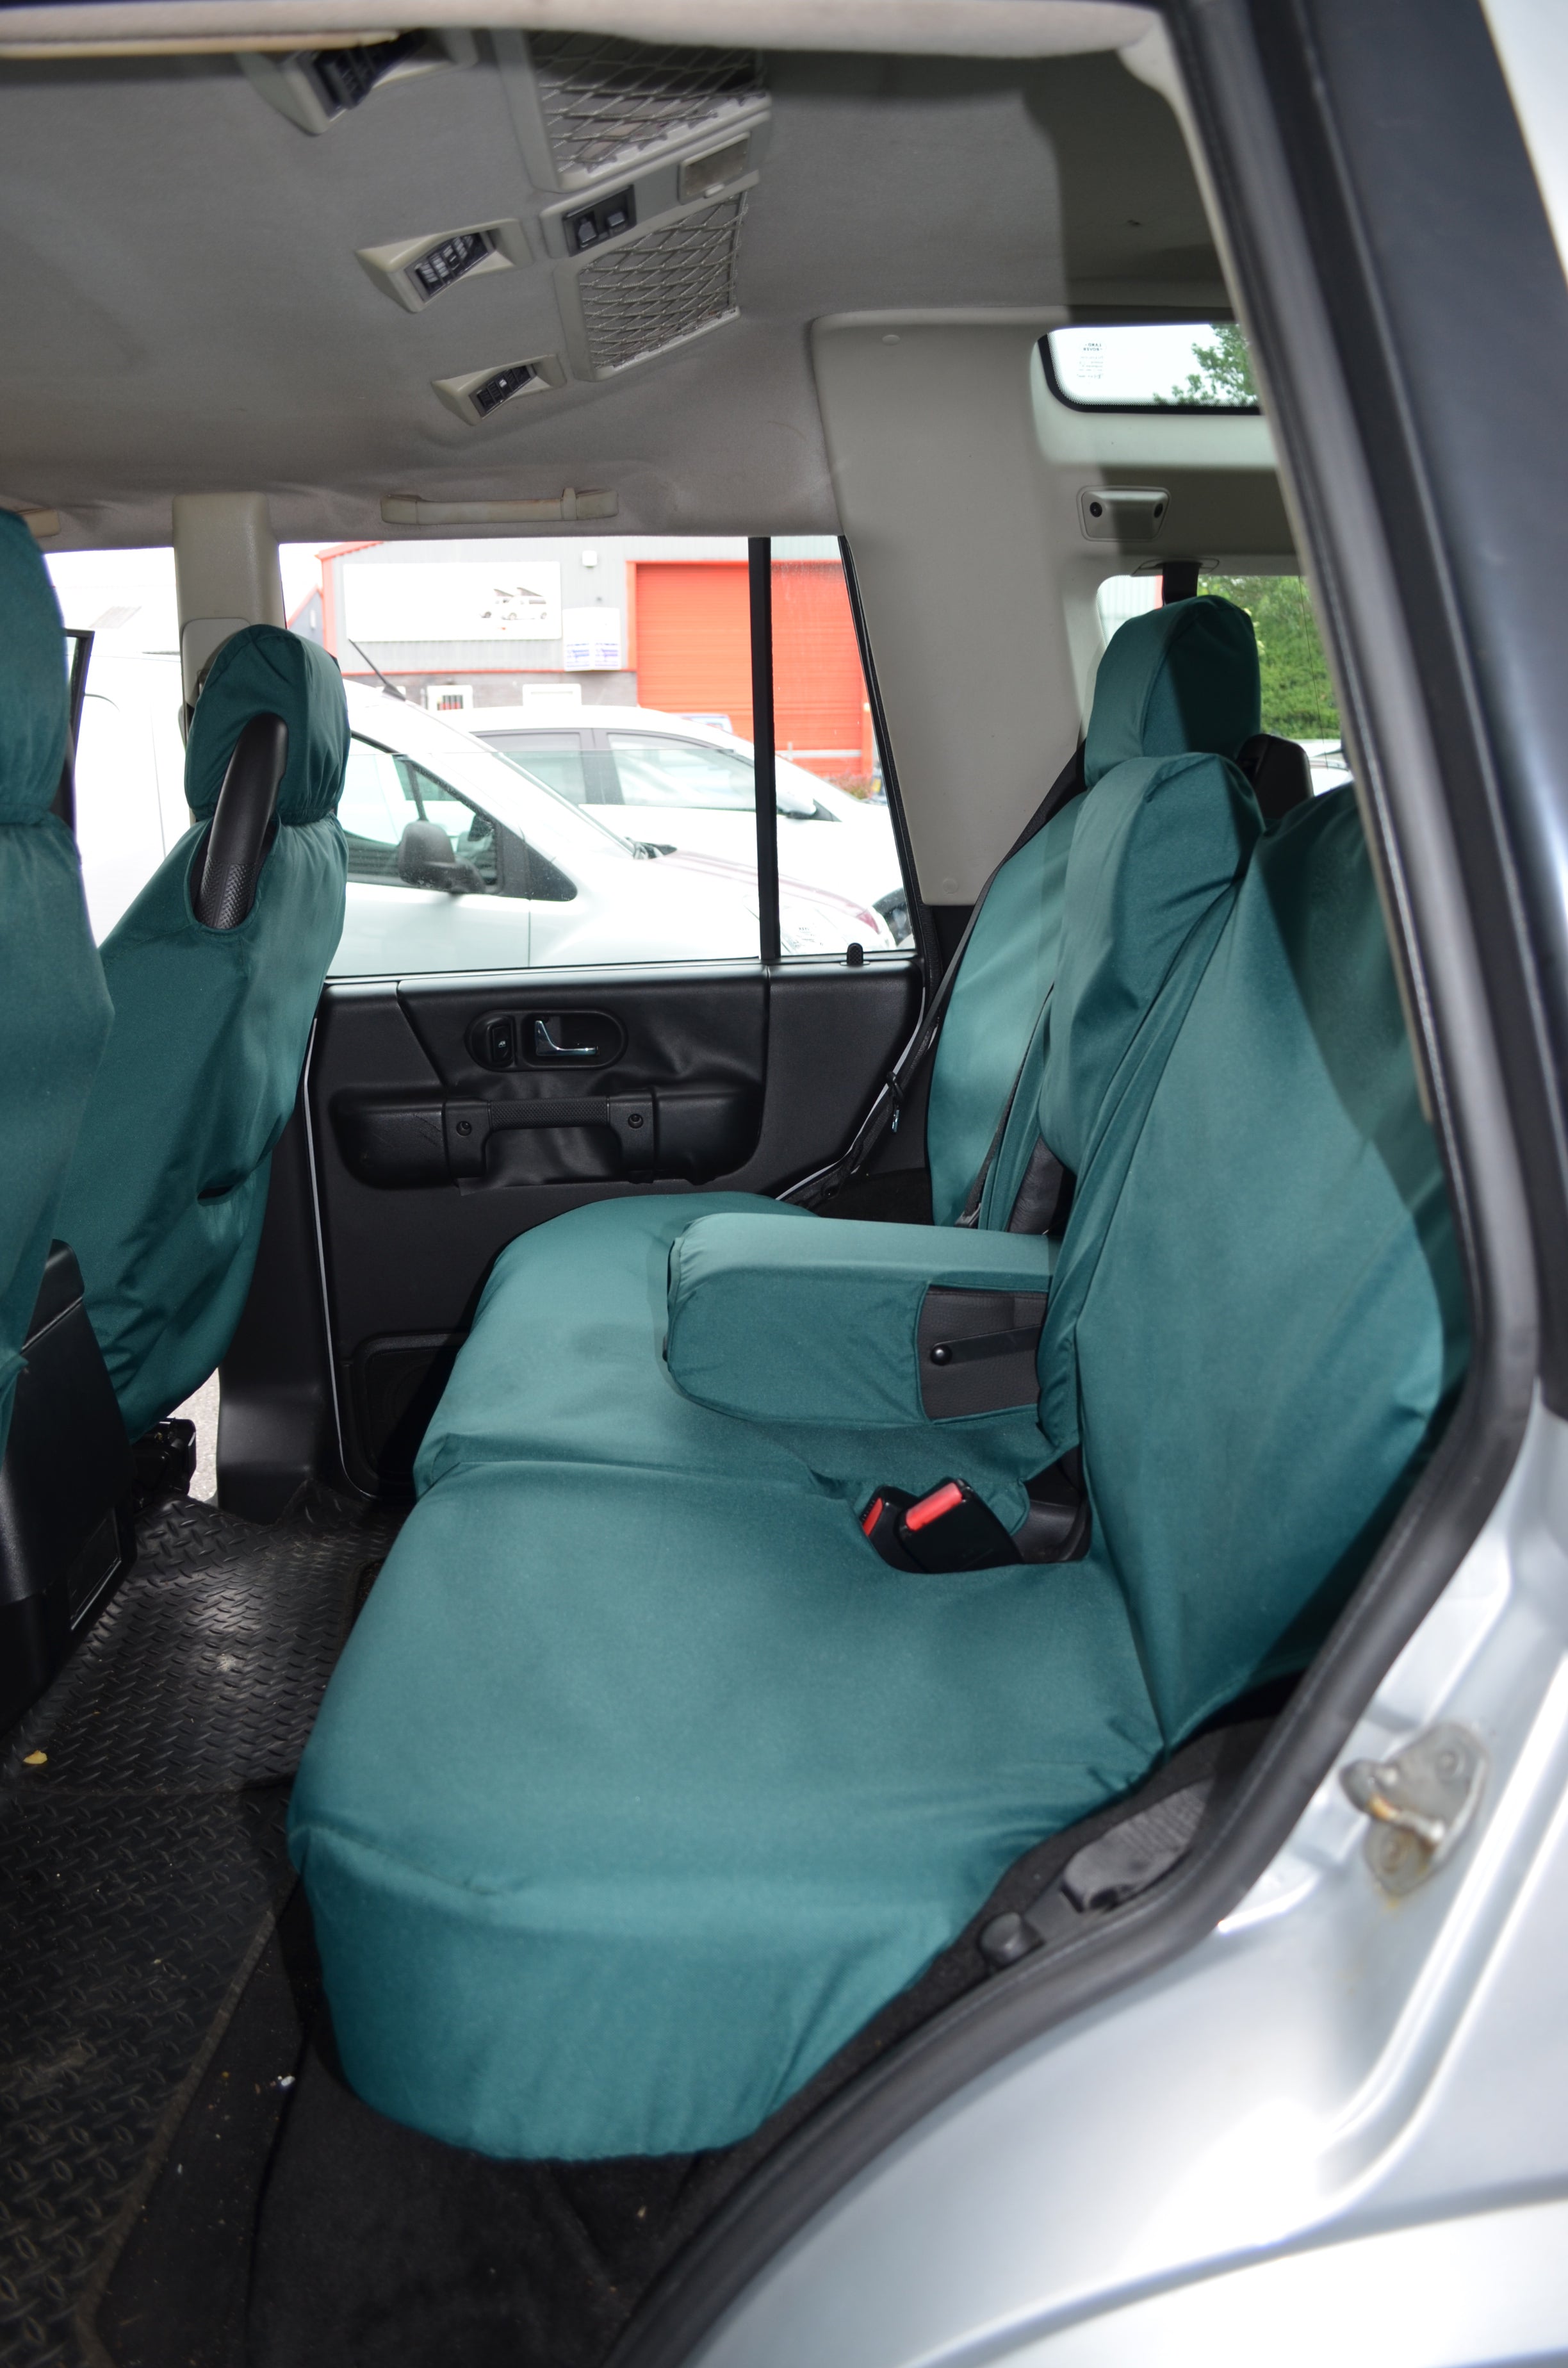 Land Rover Discovery 1998 - 2004 Series 2 Seat Covers  Turtle Covers Ltd